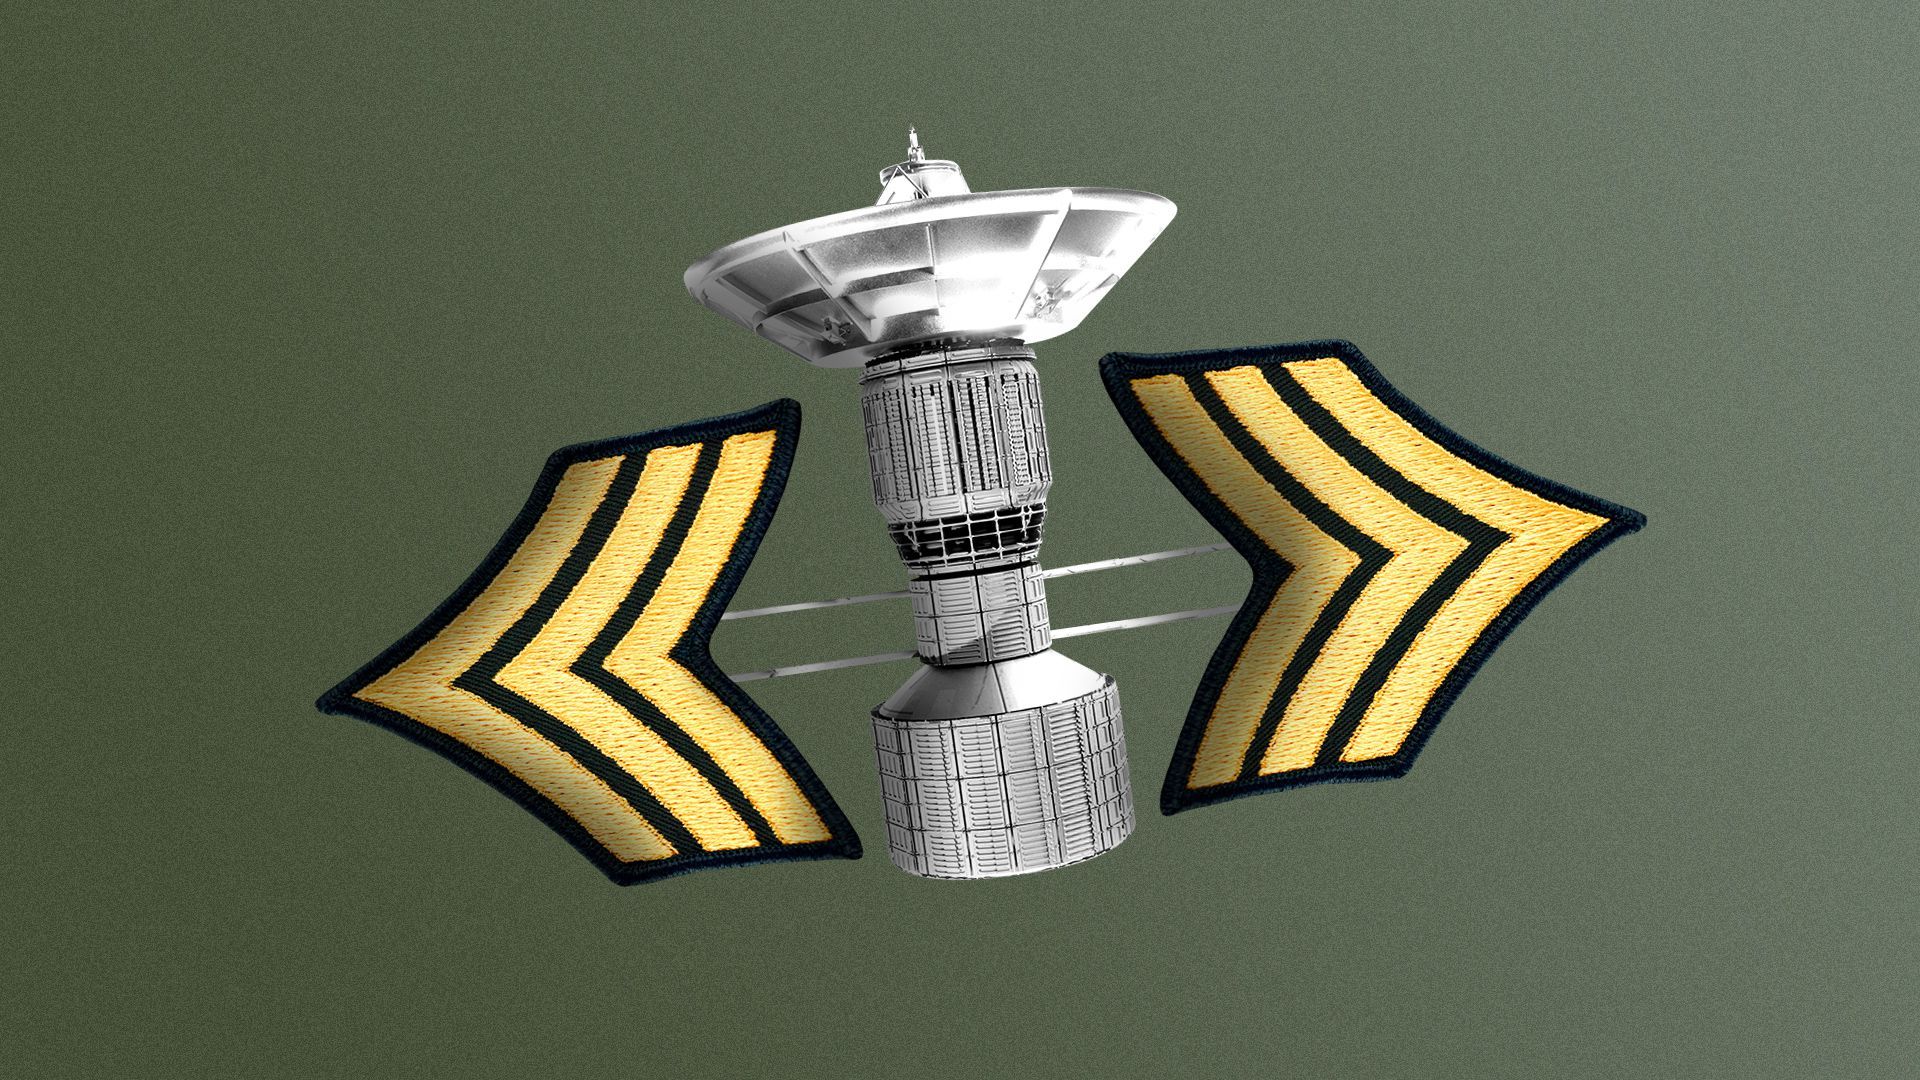 Illustration of a sewn military badge fashioned as a satellite. 